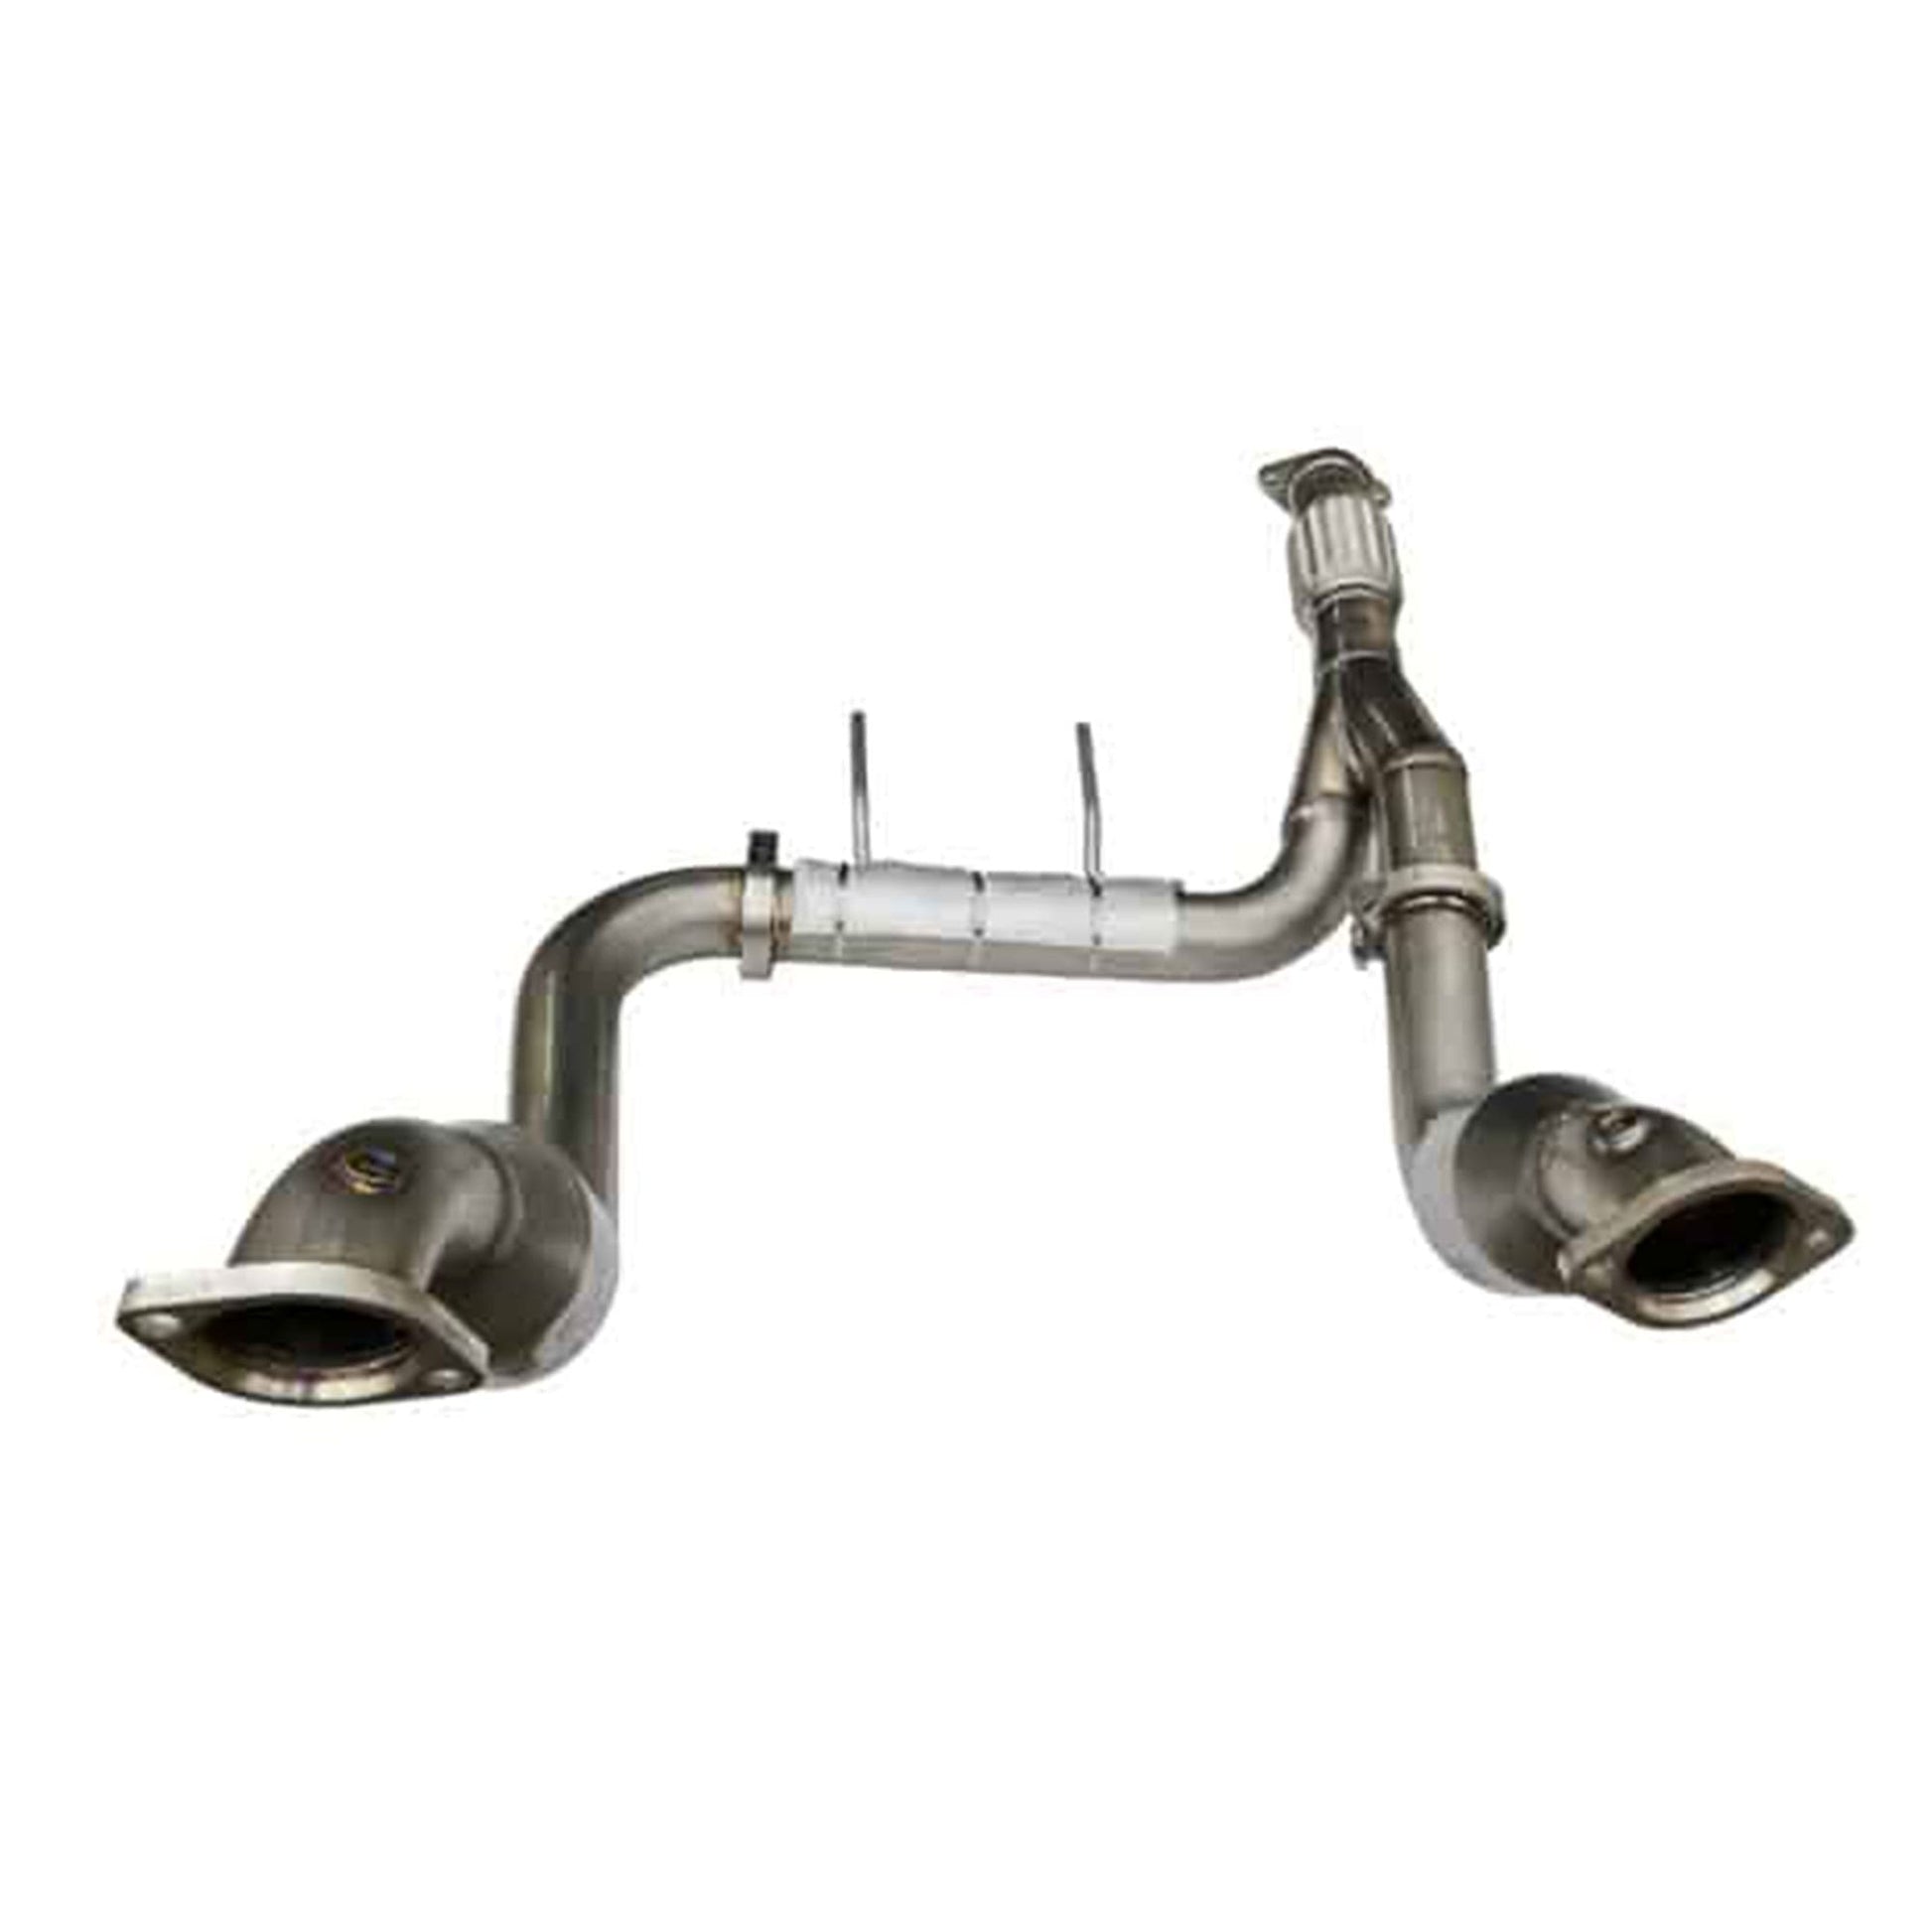 MANHART MH5BC4001100 DOWNPIPES SPORT FOR FORD BRONCO WITH 400 CELLS CATALYTIC CONVERTERS